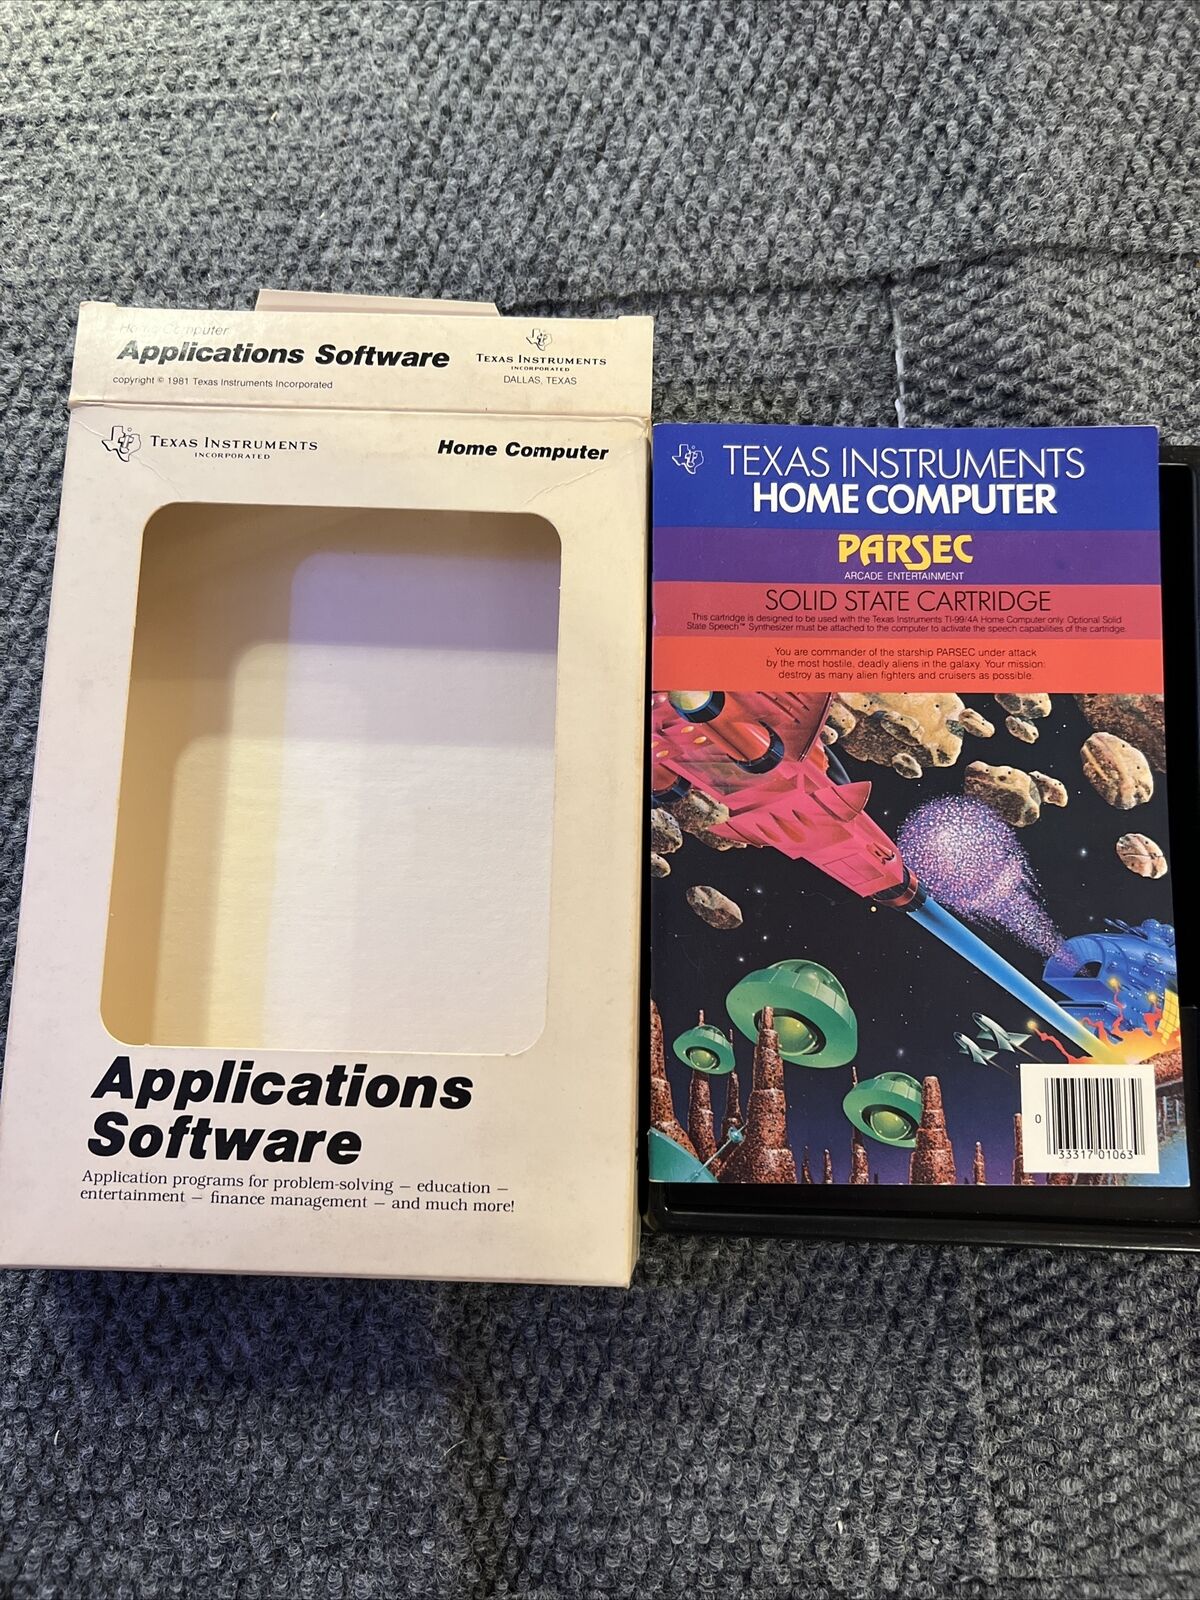 Texas Instruments Home Computer Parsec Arcade Solid State Cartridge Very Nice